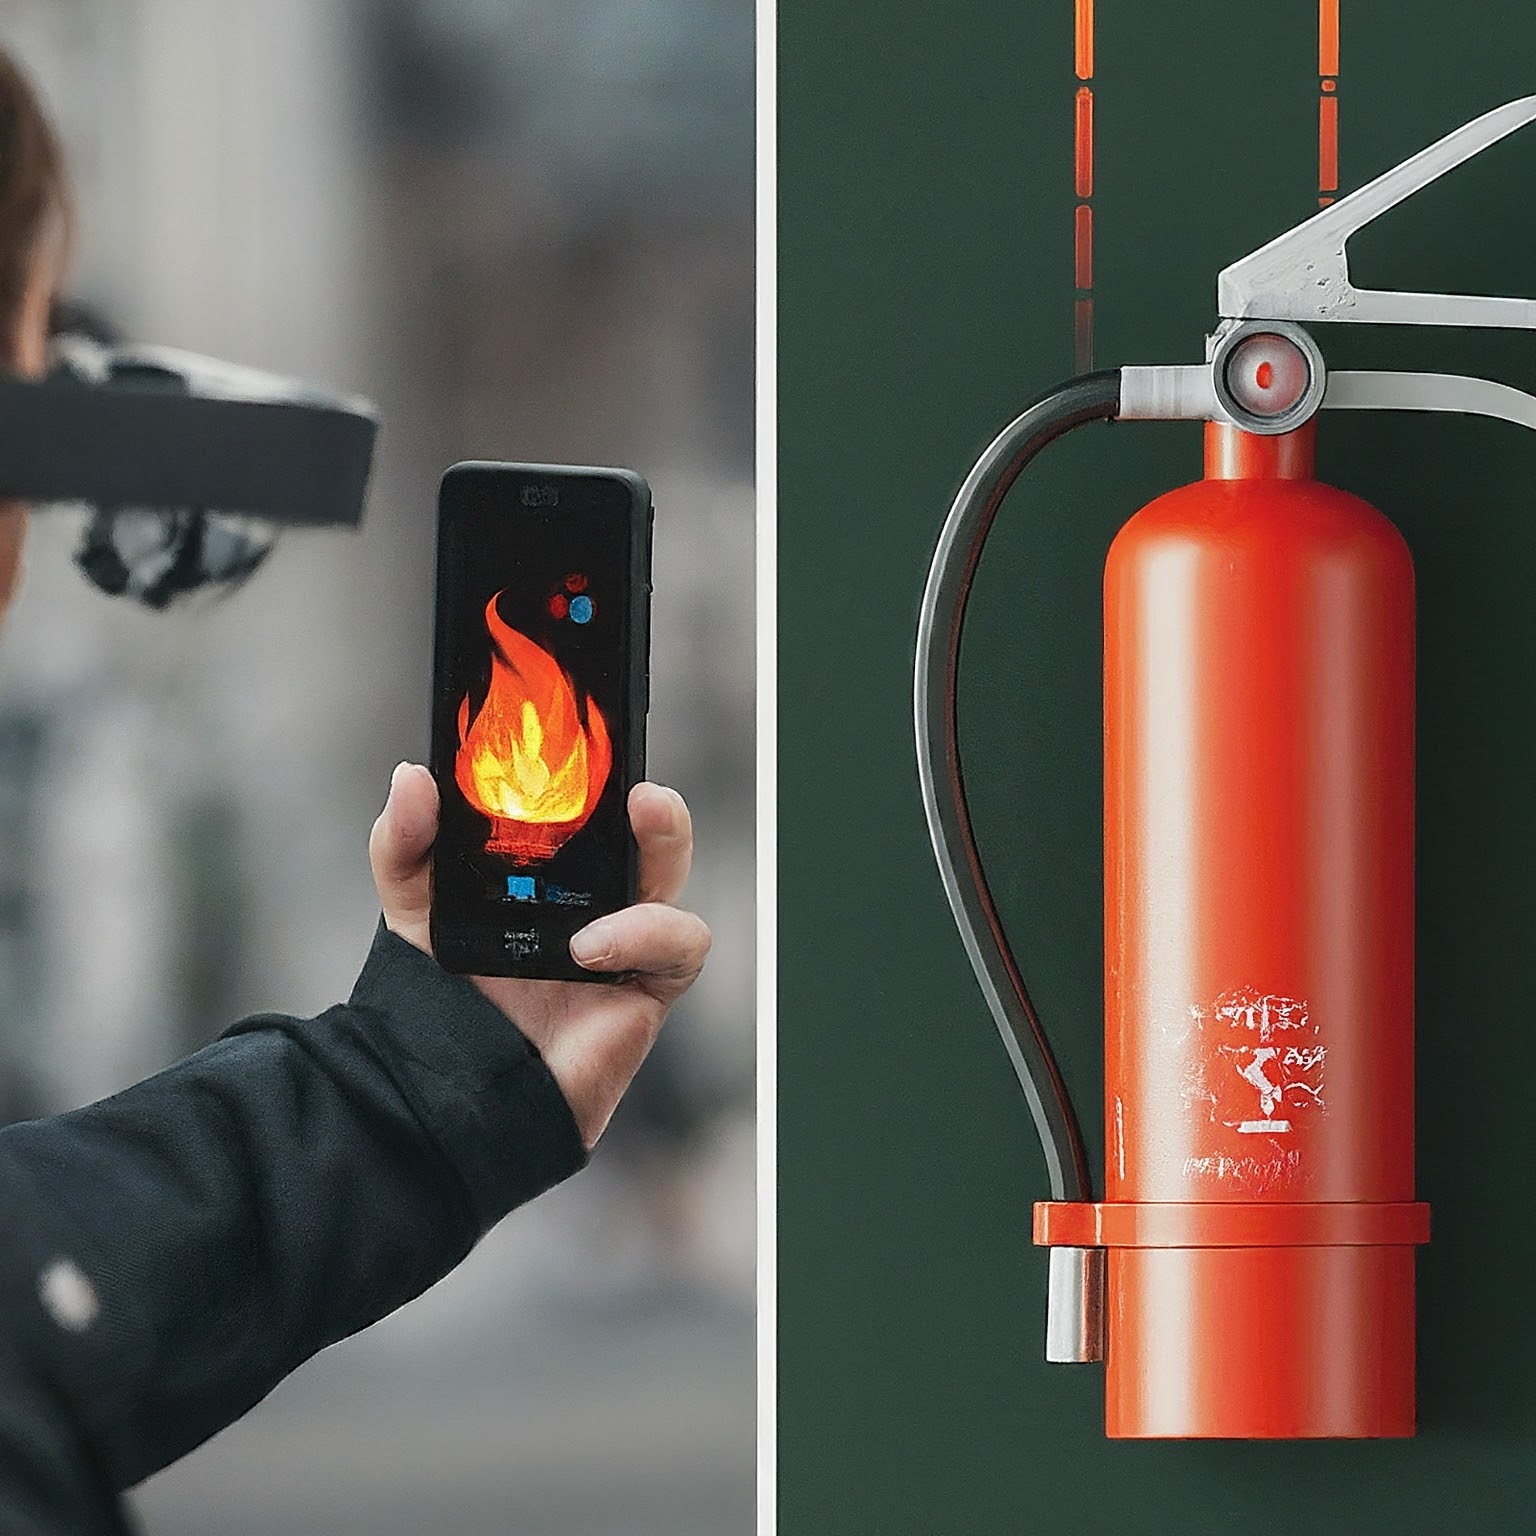 Edge AI Fire Safety Training solution